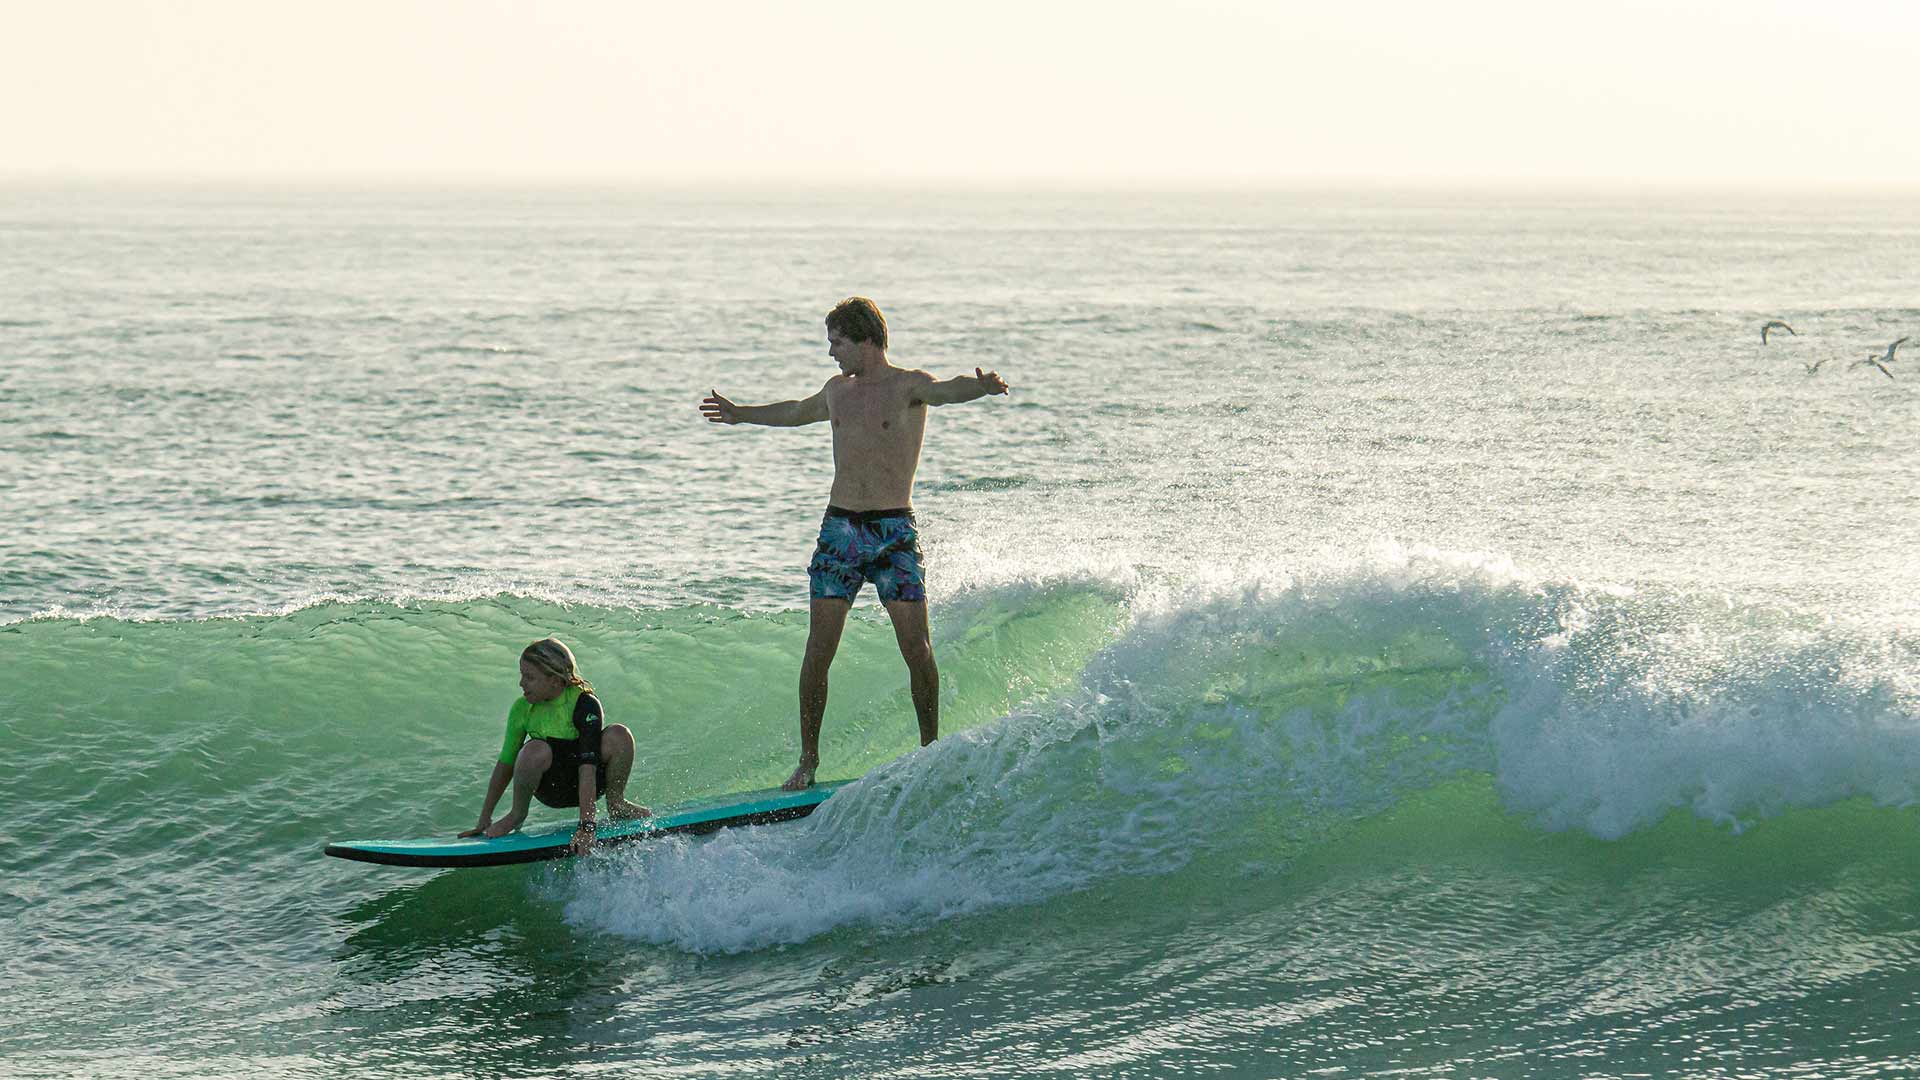 Father and son surfing a wave together on the same board, the boy crouching in front of the board and the father standing at the back.